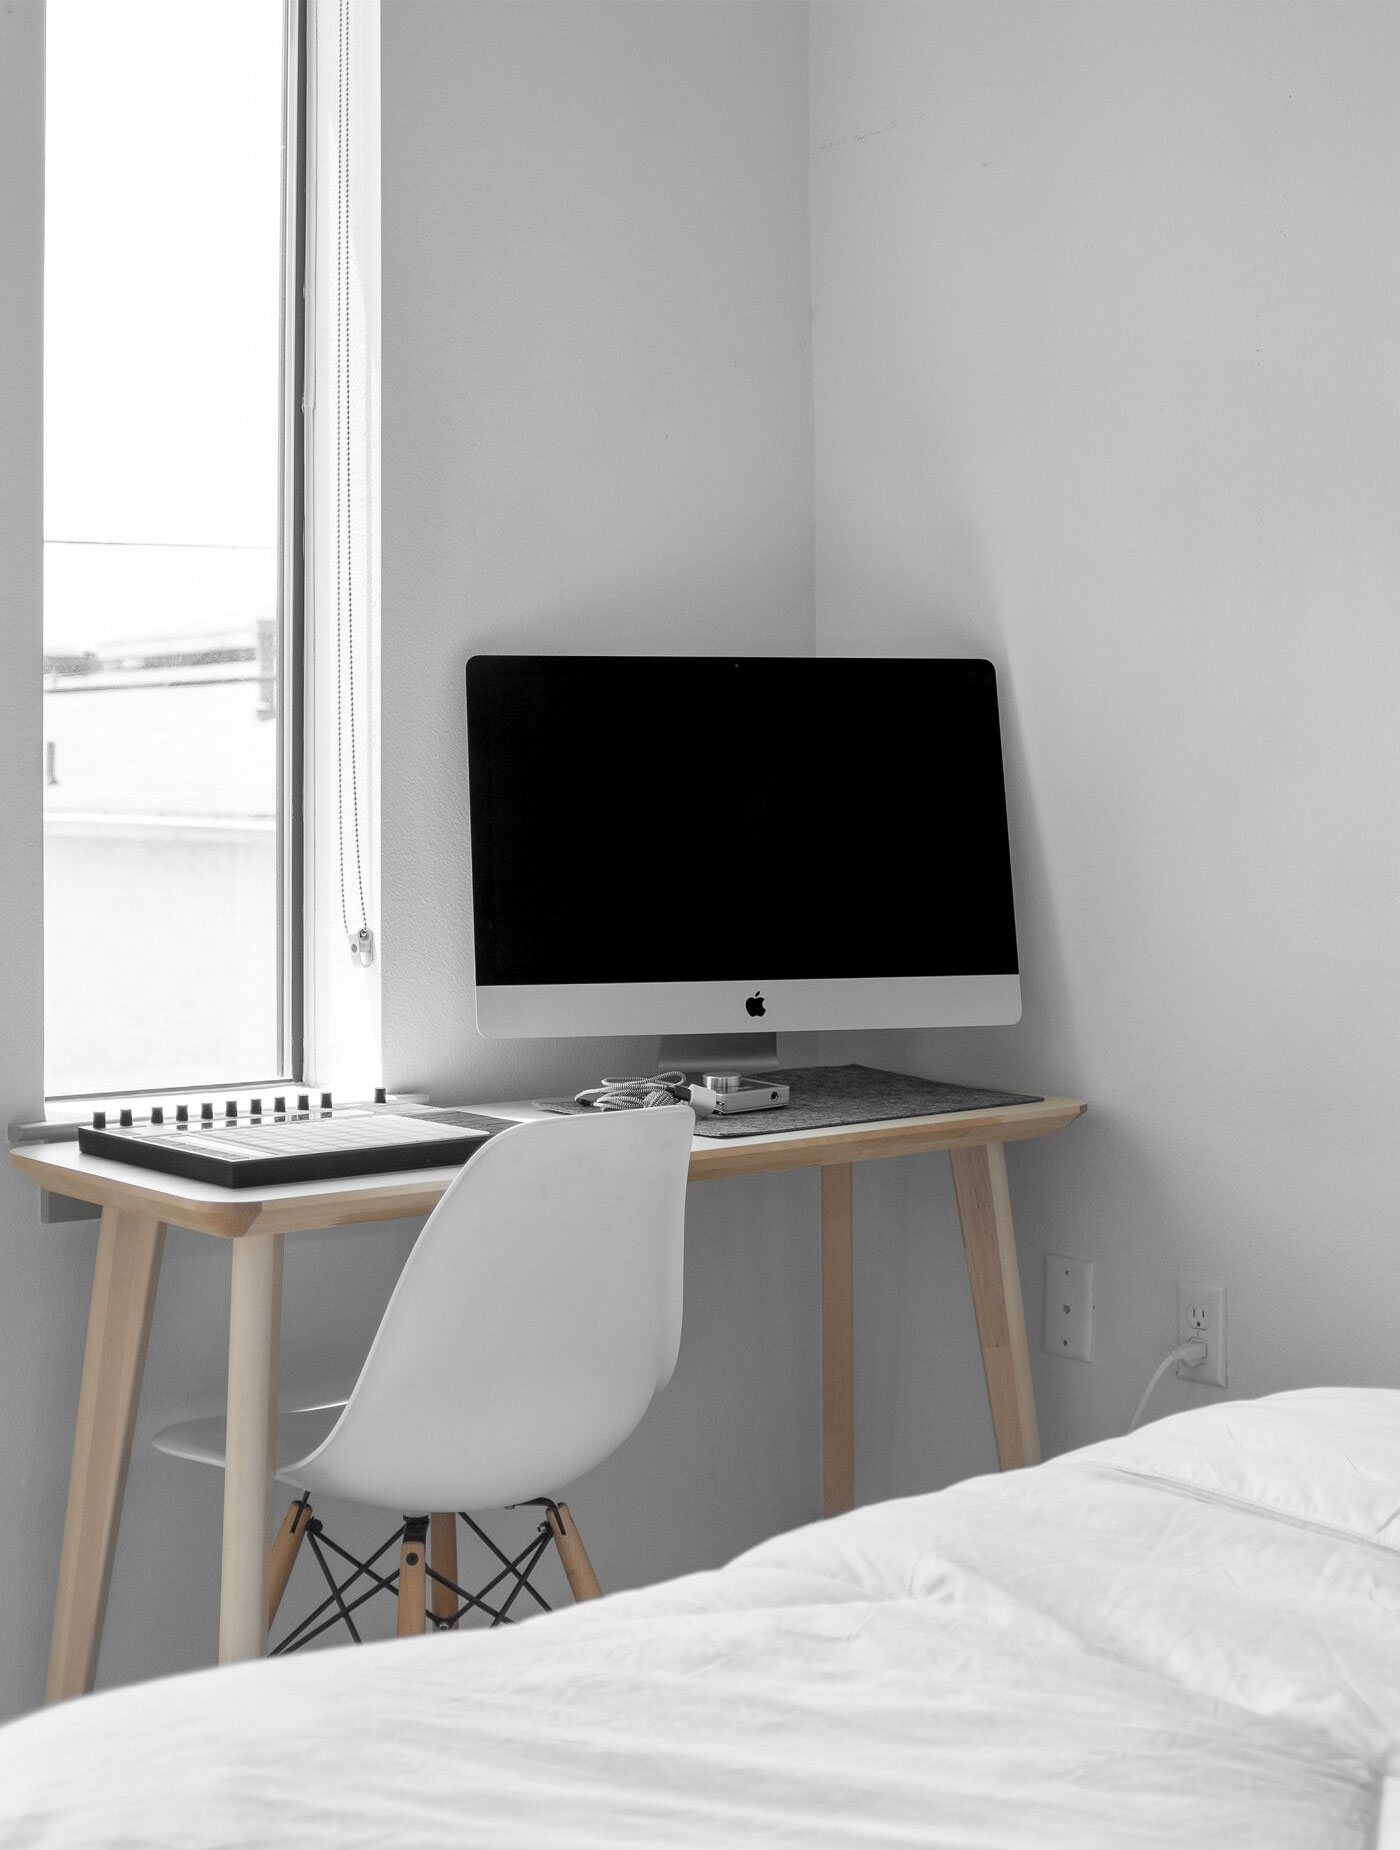 iMac on a Desk at the Corner of the Room Mockup FREE PSD